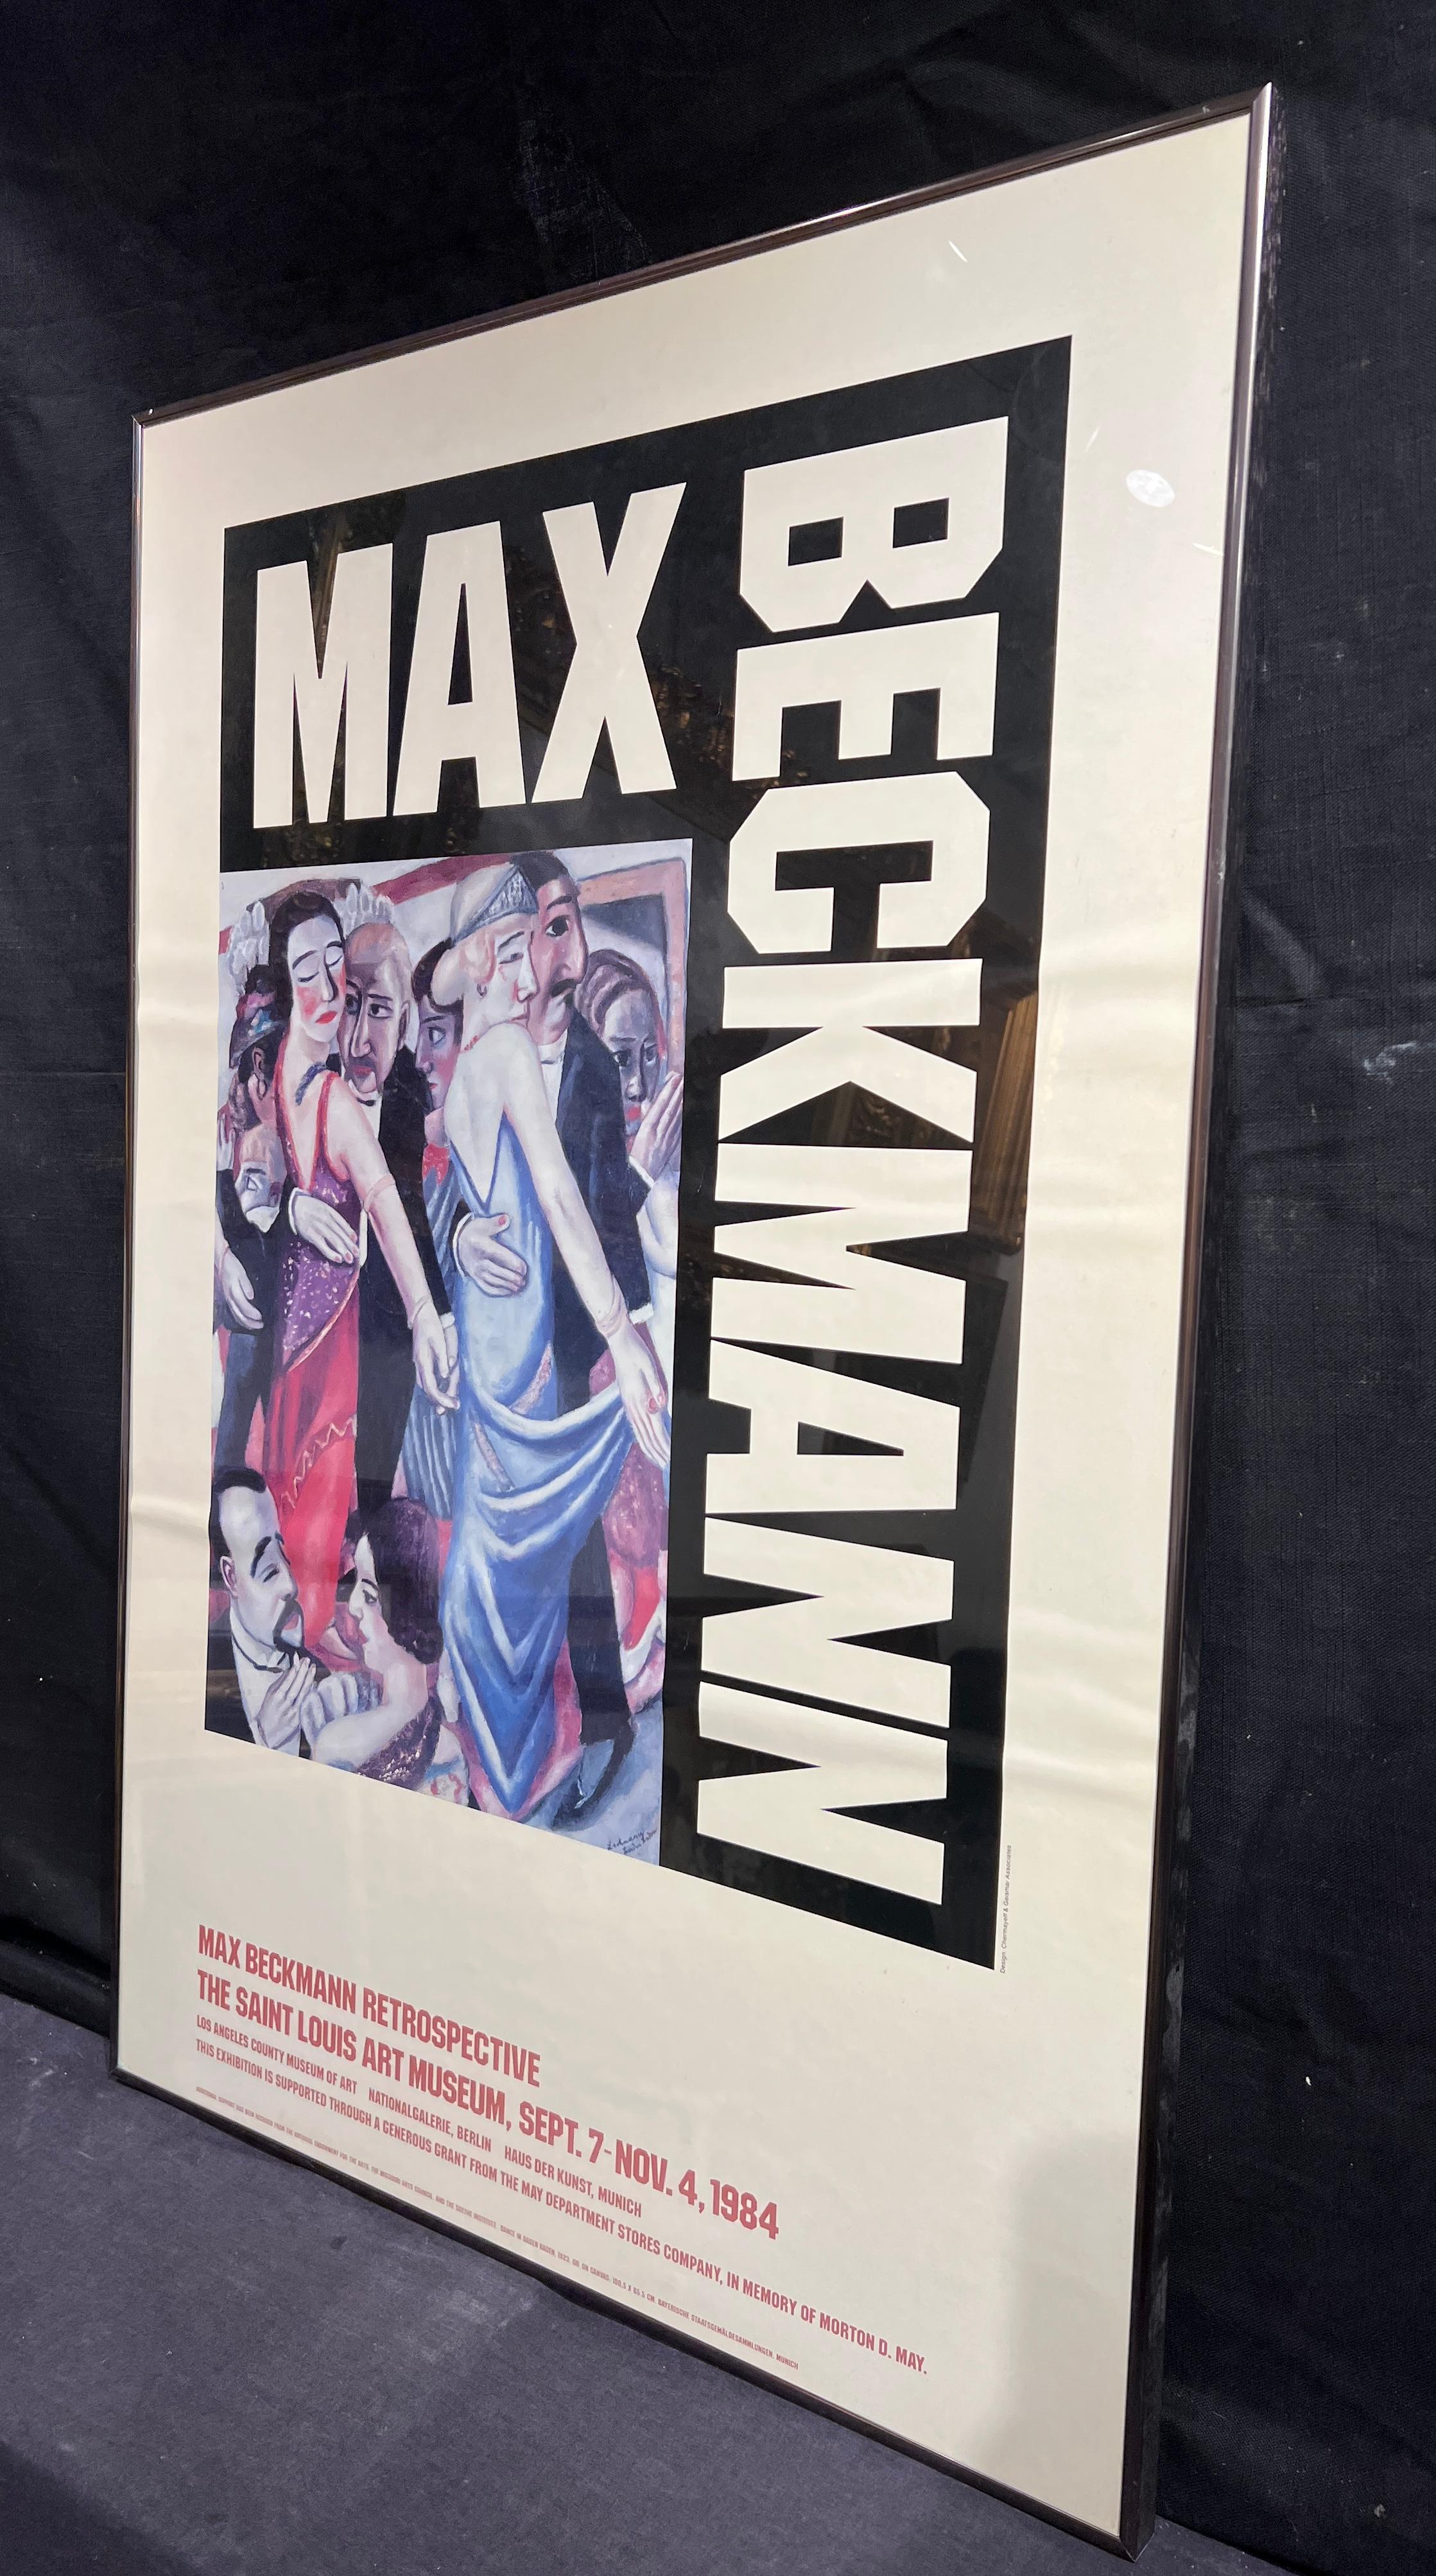 This is a vintage museum exhibition poster from the Max Beckmann Retrospective at the Saint Louis Art Museum, 1984.

Max Beckmann was a German  Expressionist painter worthy of inclusion in a great tradition - the tradition of anguished German